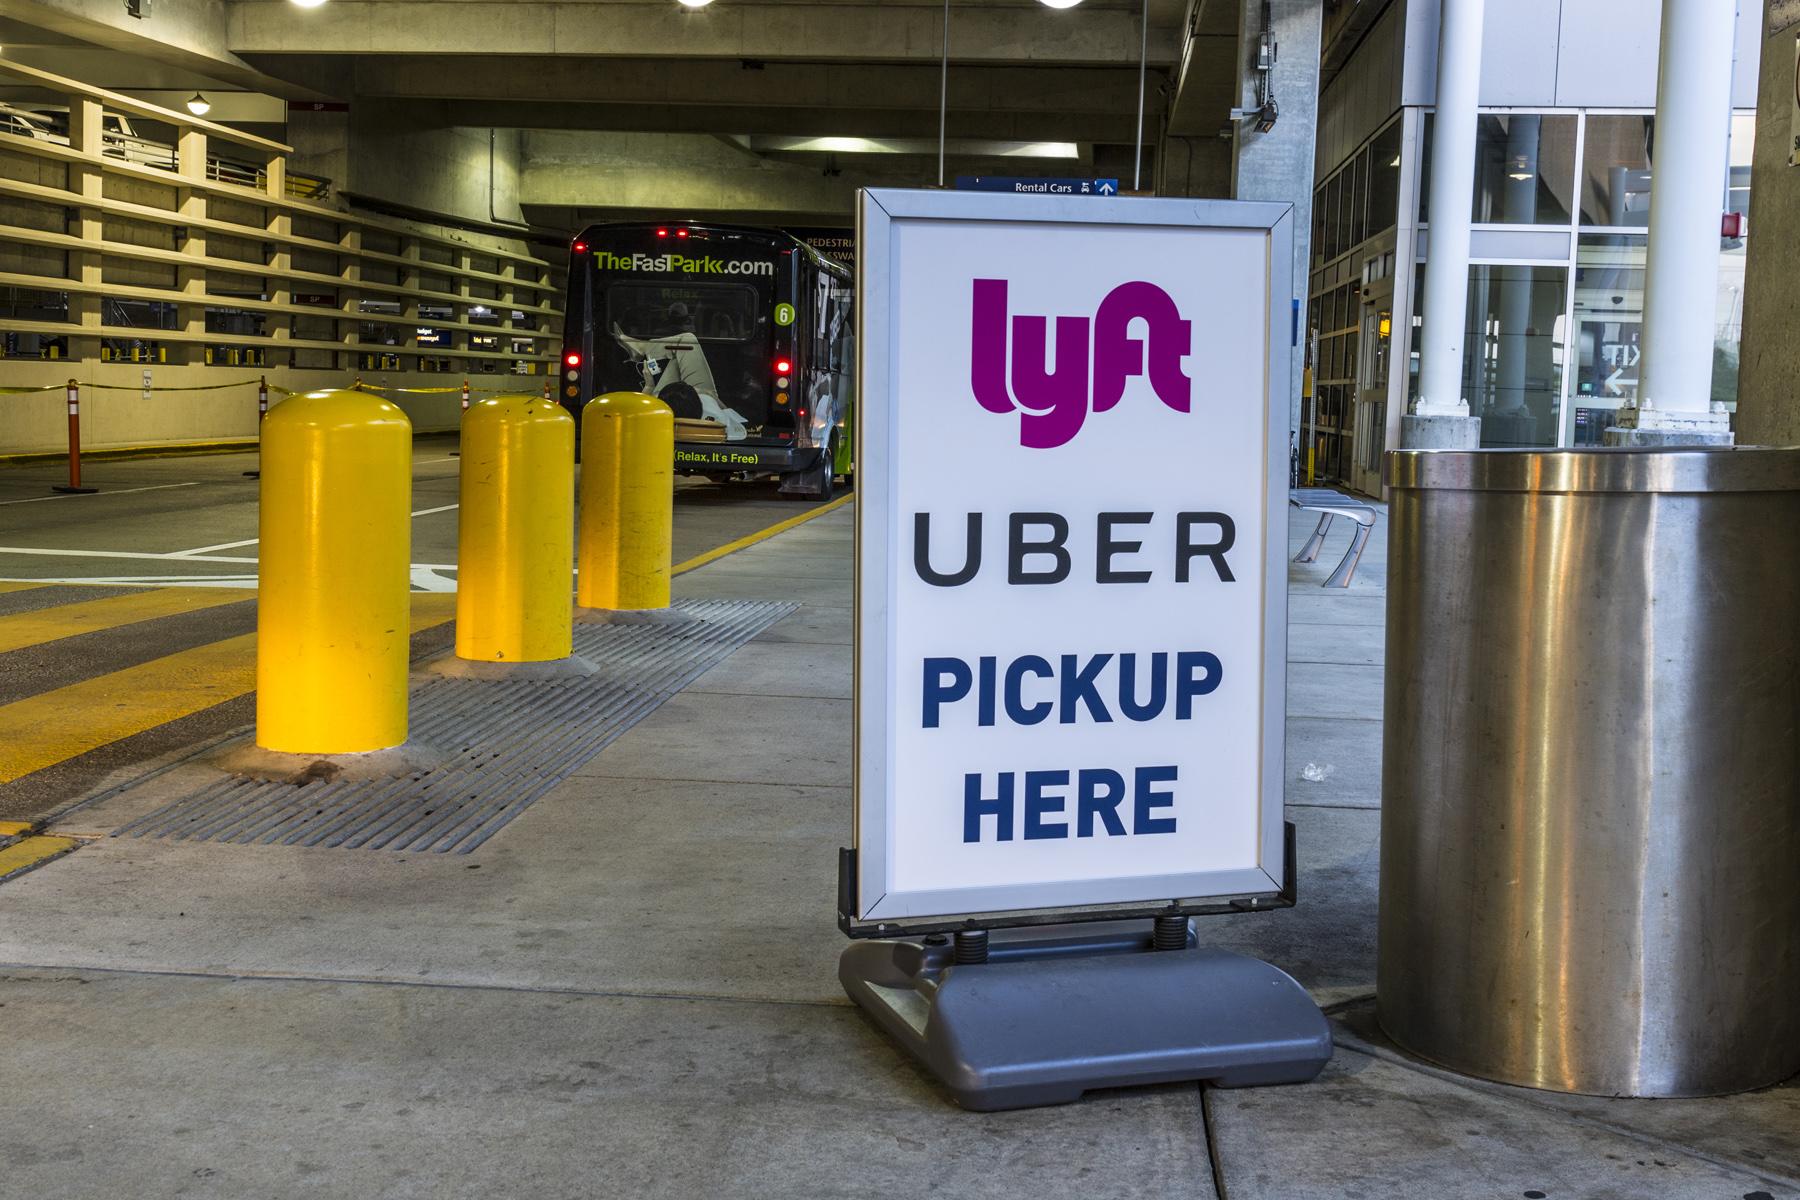 How To Spot A Fake Uber At The Airport